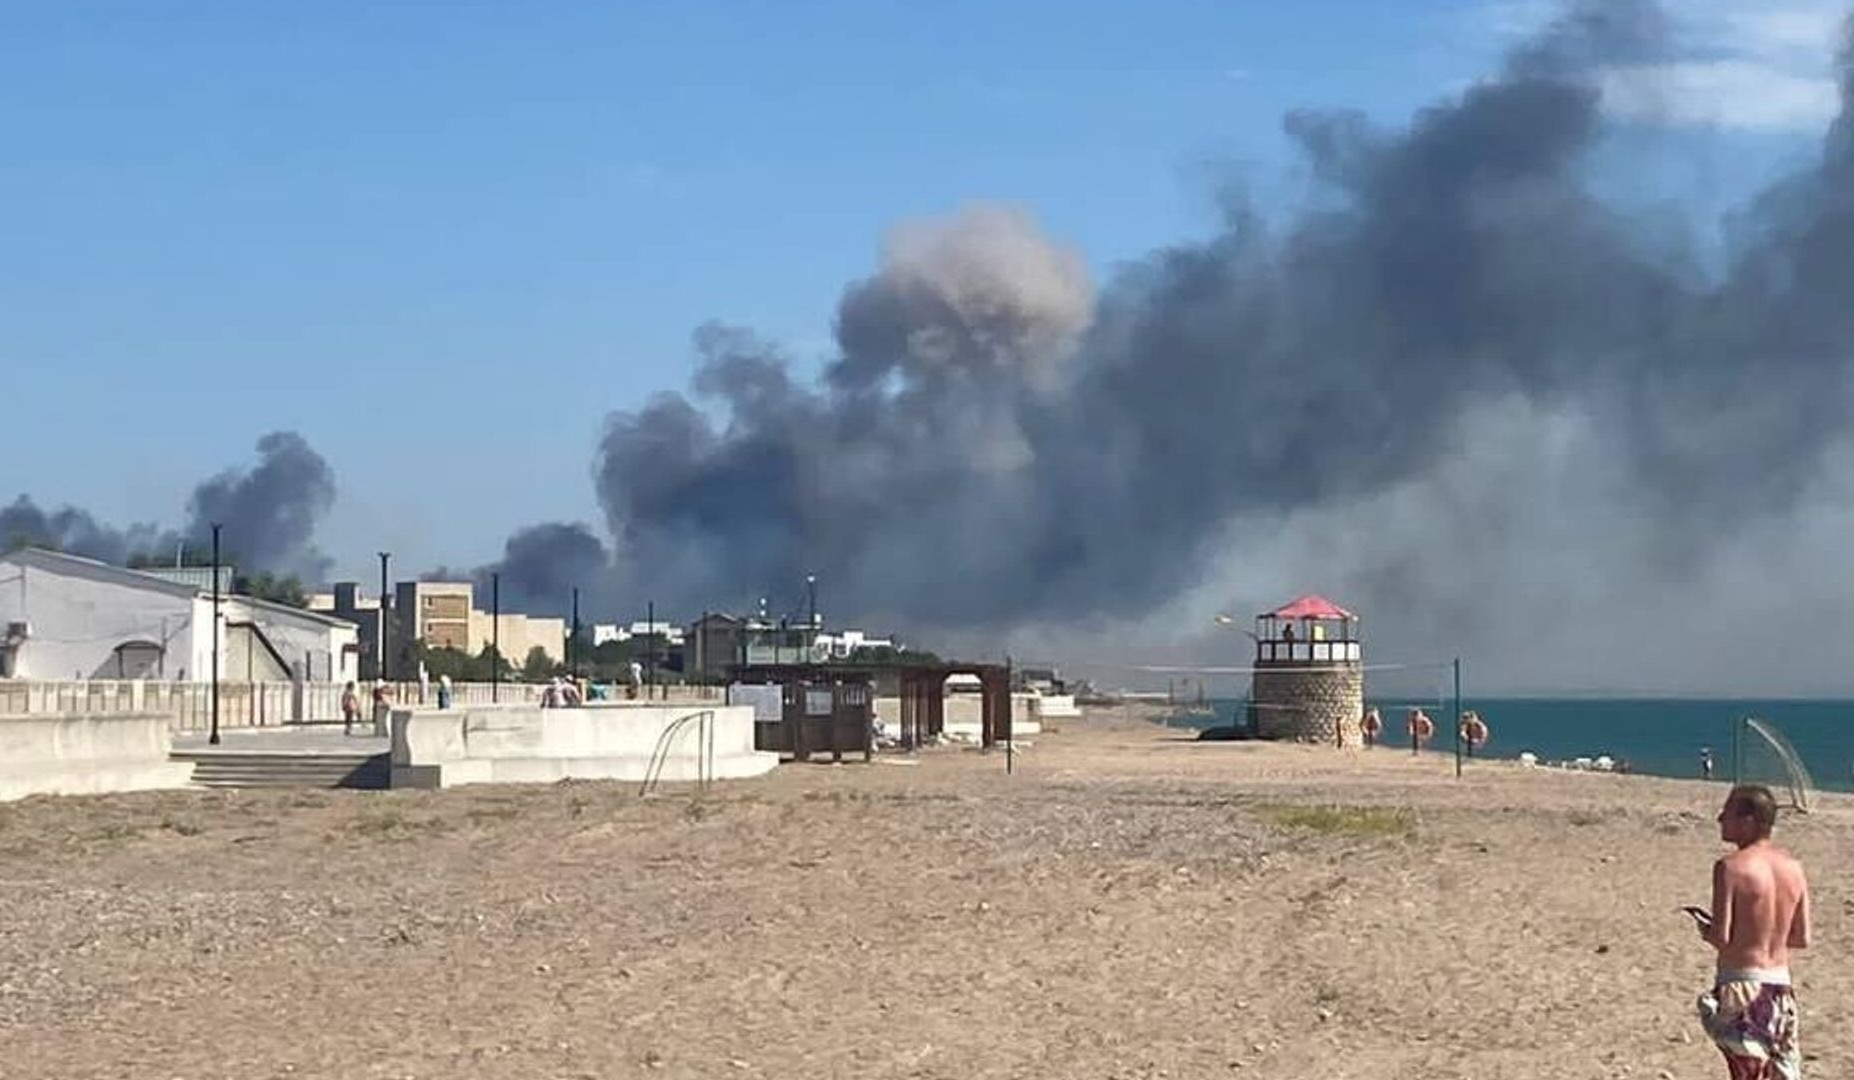 Injury toll in blasts at Novofyodorovka airfield rises to 13: Crimean Health Ministry